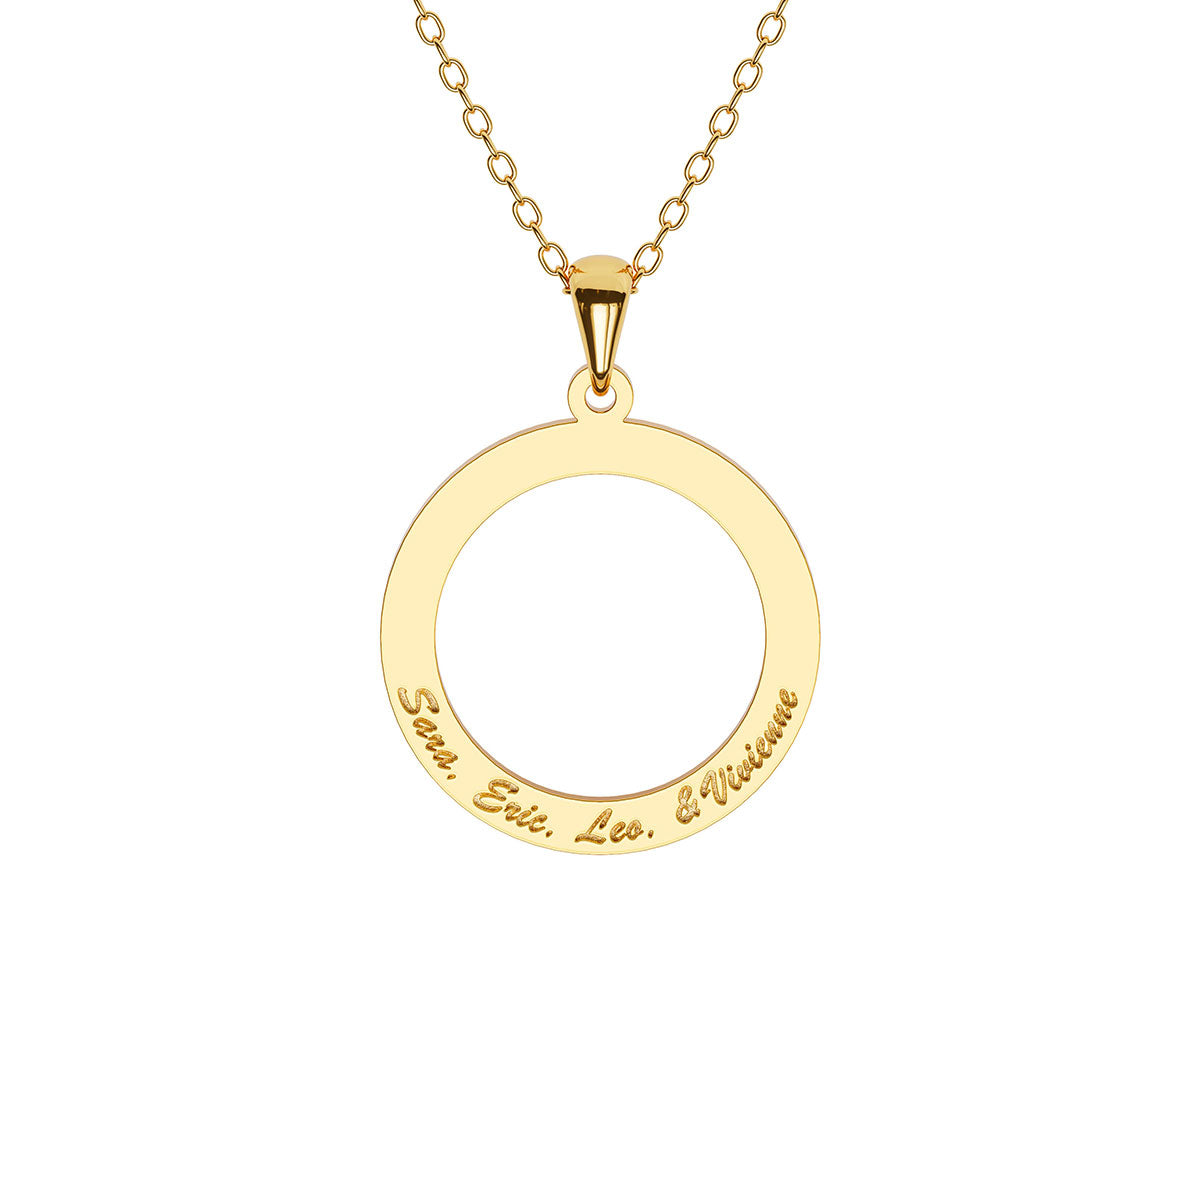 Personalized Disc Necklace with 4 Name Engravings